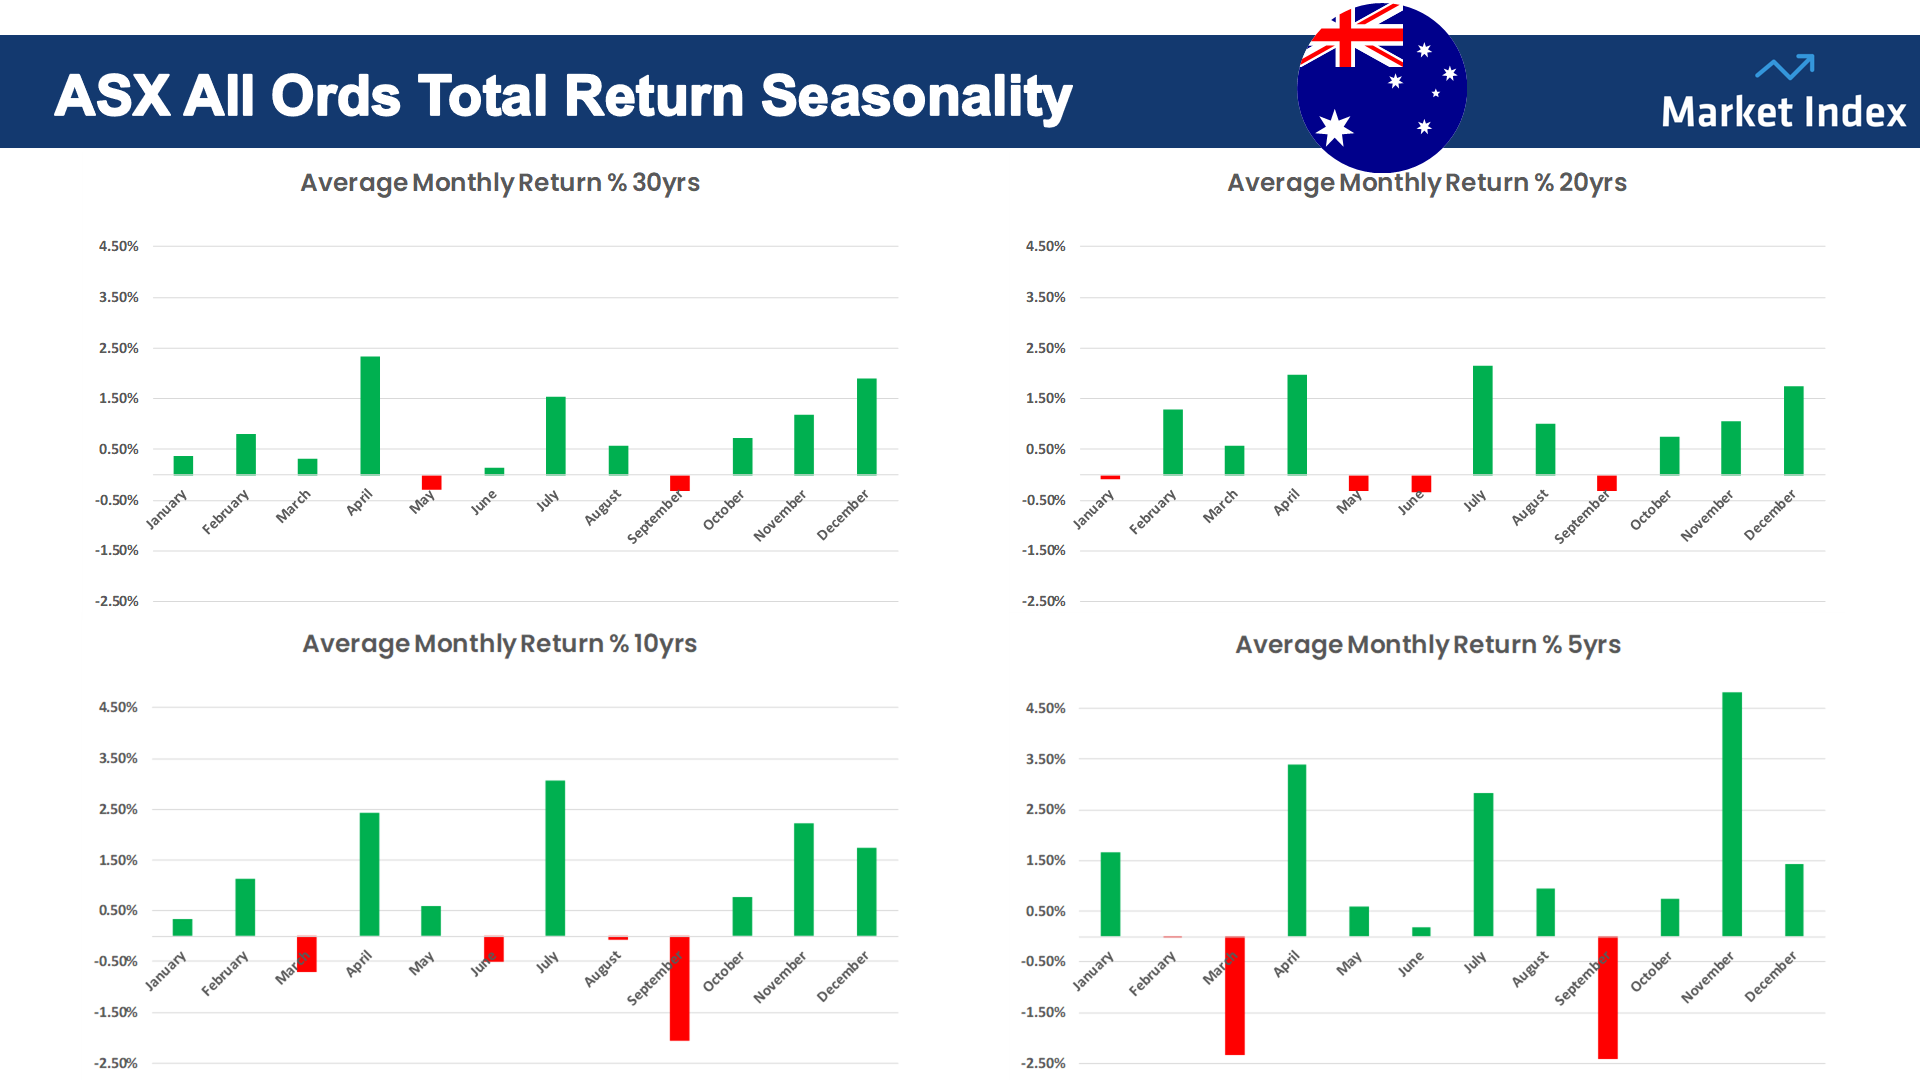 This is how the typical year looks for the Australian stock market